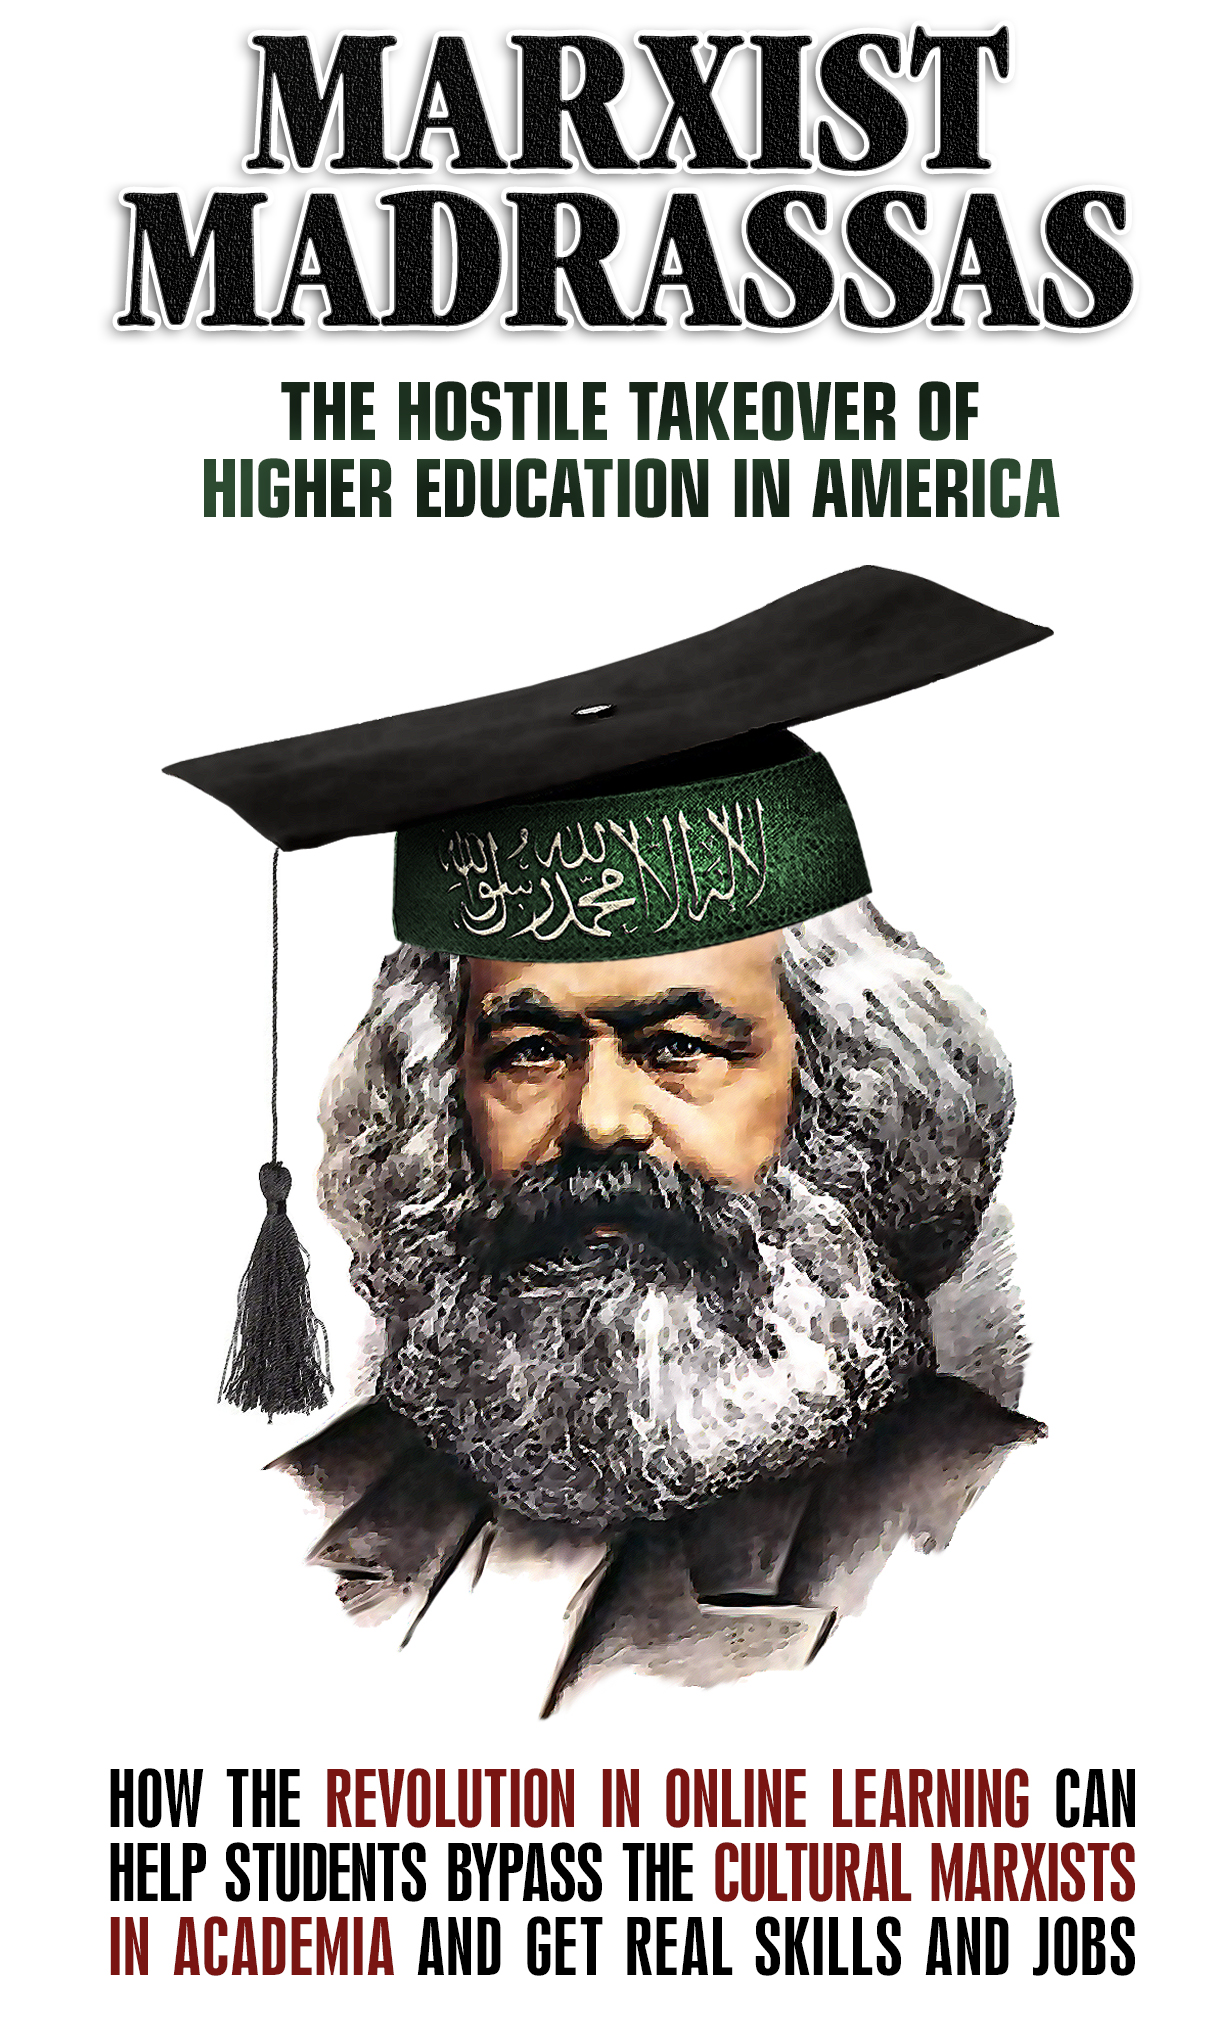 New Book Exposes “Marxist Madrassas” in Higher Education